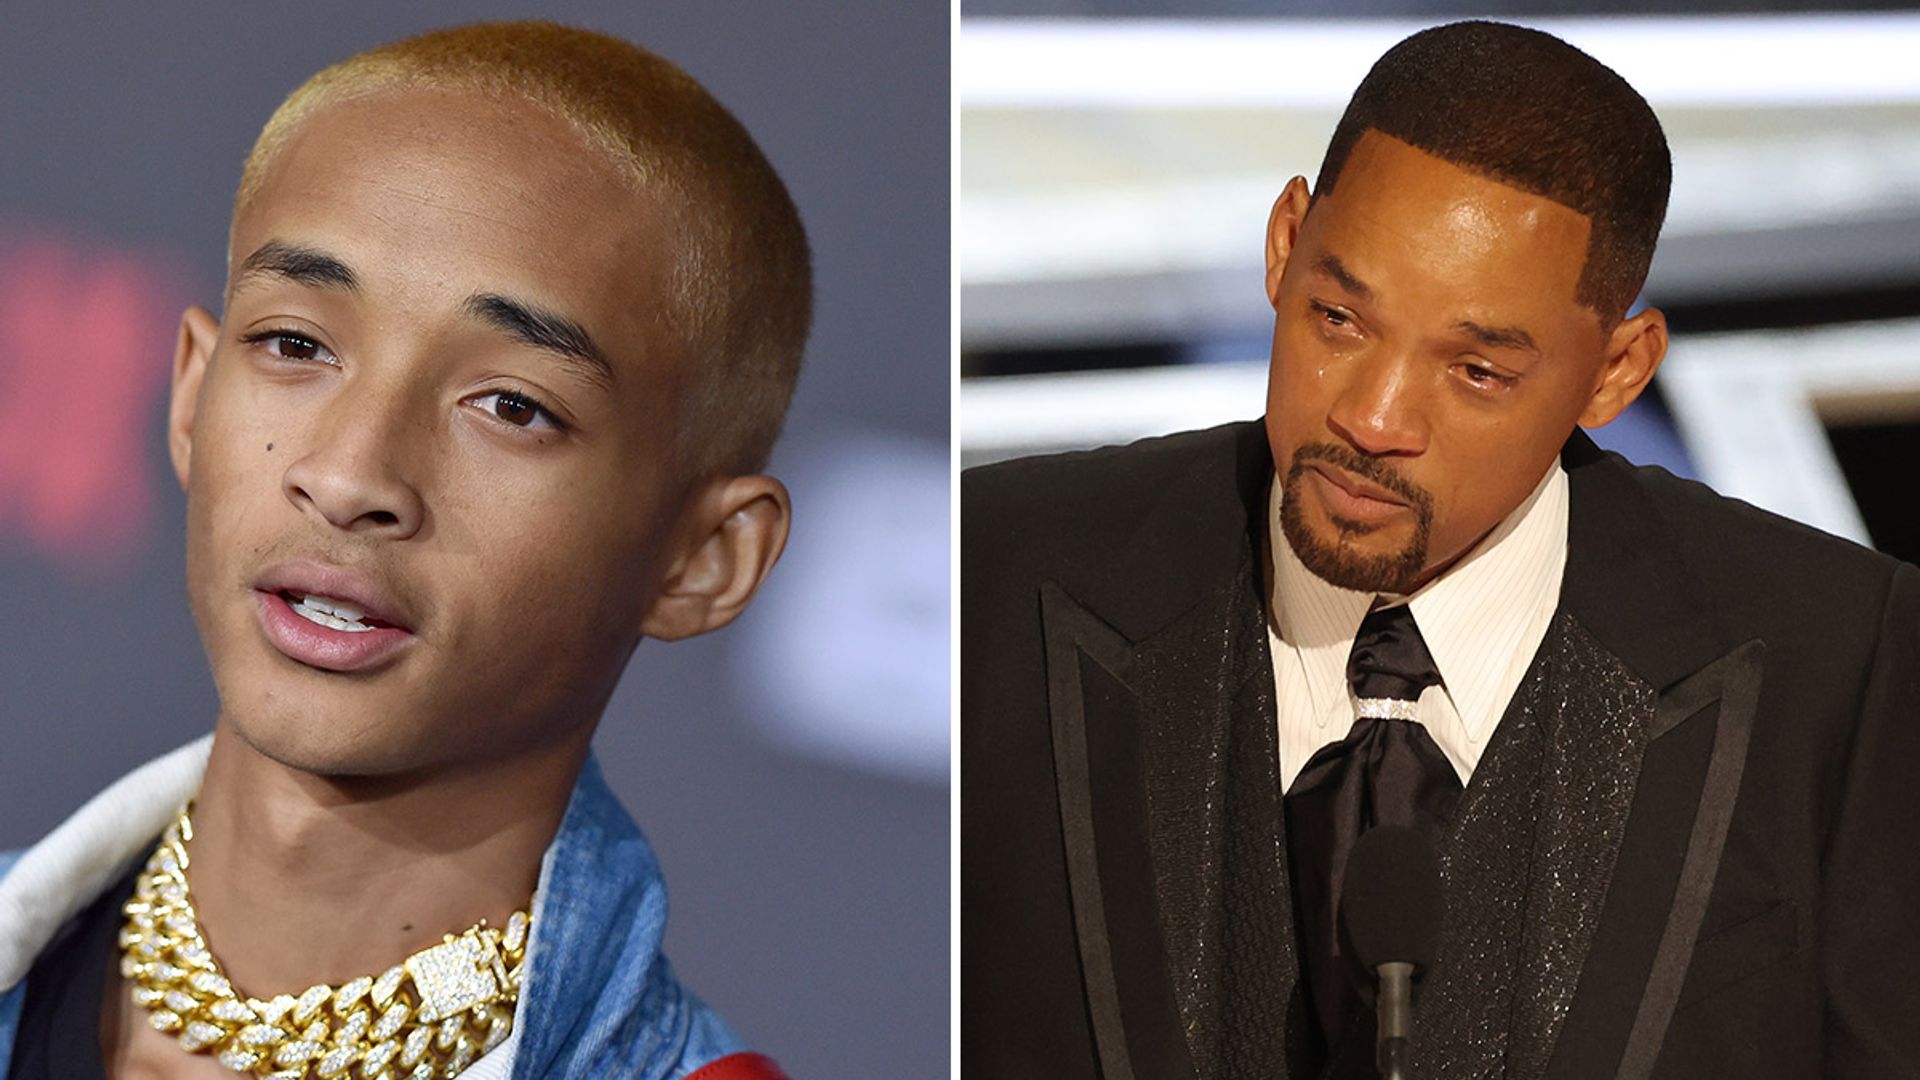 Jaden Smith defends dad Will after shocking altercation